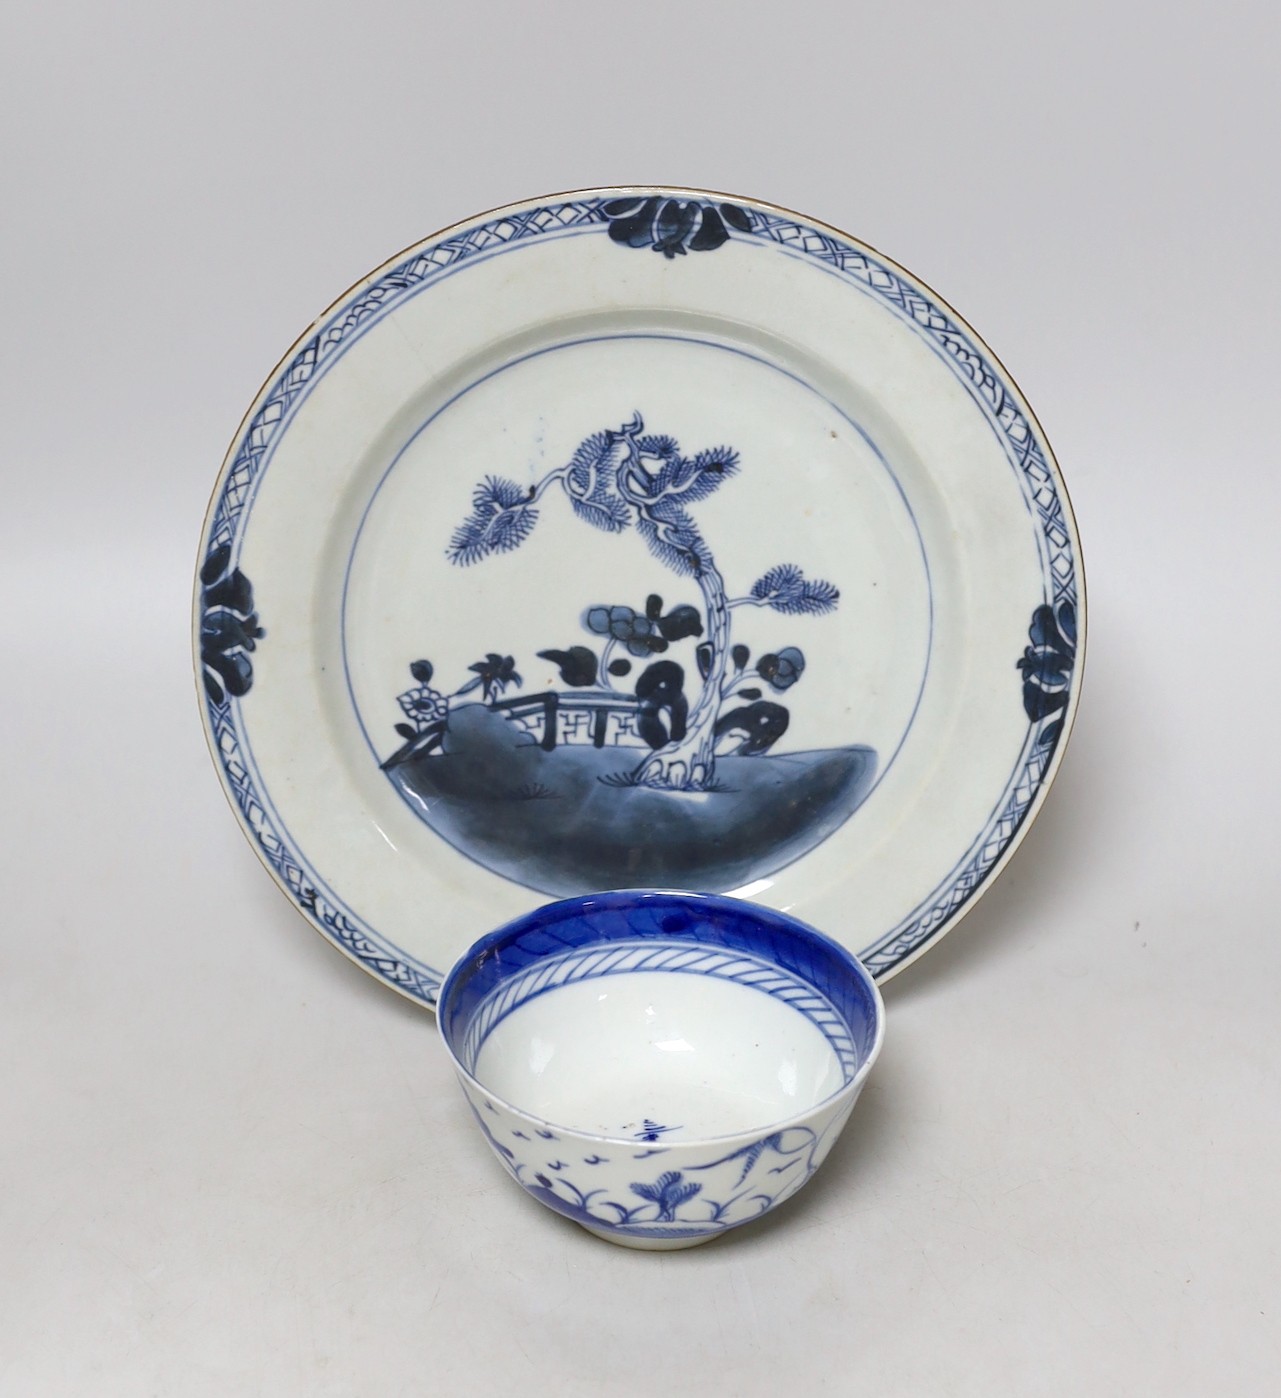 An 18th century Chinese blue and white plate, together with a cloisonné enamel dragon vase and a blue and white bowl. Vase height 23cm                                                                                      